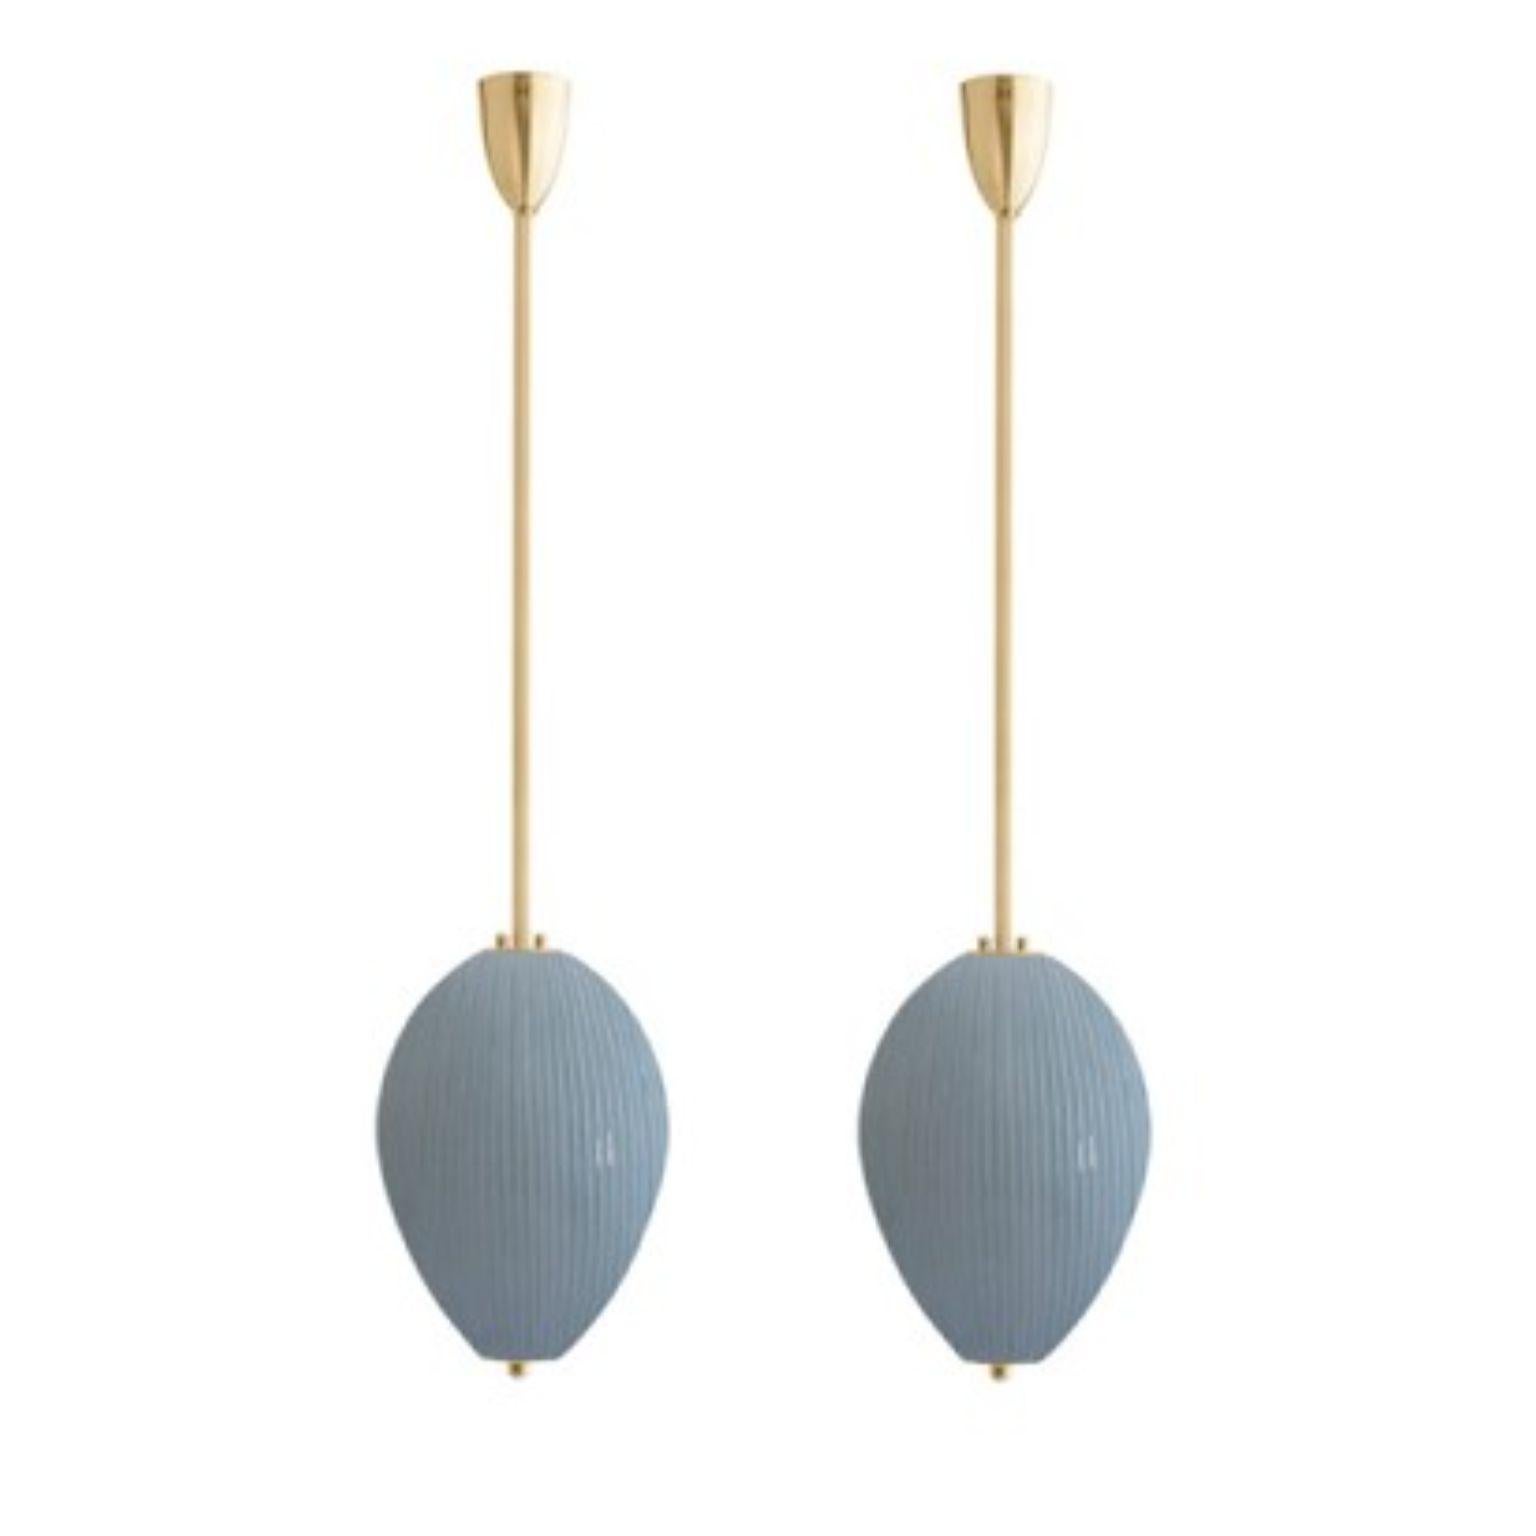 Pendant China 10 by Magic Circus Editions
Dimensions: H 90 x W 32 x D 32 cm, also available in H 110, 130, 150, 175, 190 cm
Materials: Brass, mouth blown glass sculpted with a diamond saw
Colour: opal grey

Available finishes: Brass,